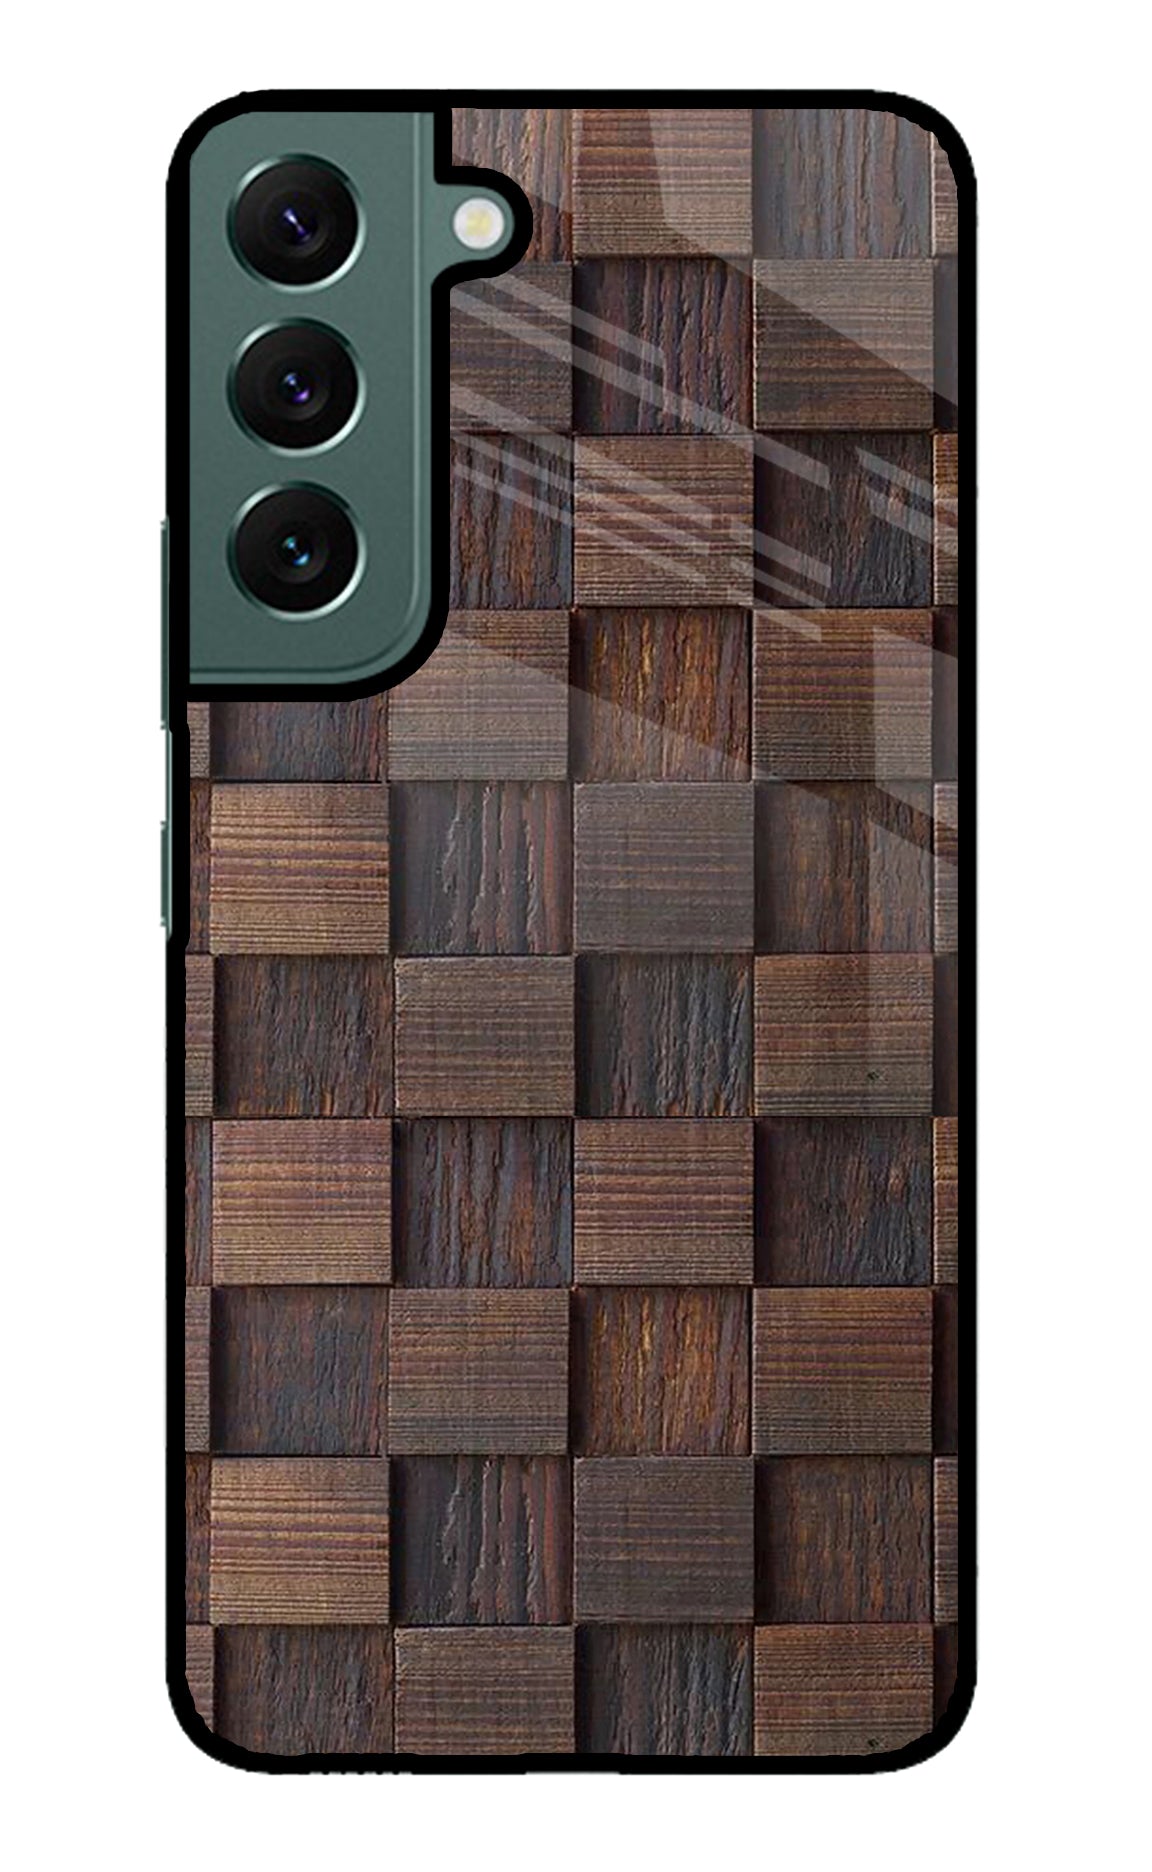 Wooden Cube Design Samsung S22 Plus Back Cover